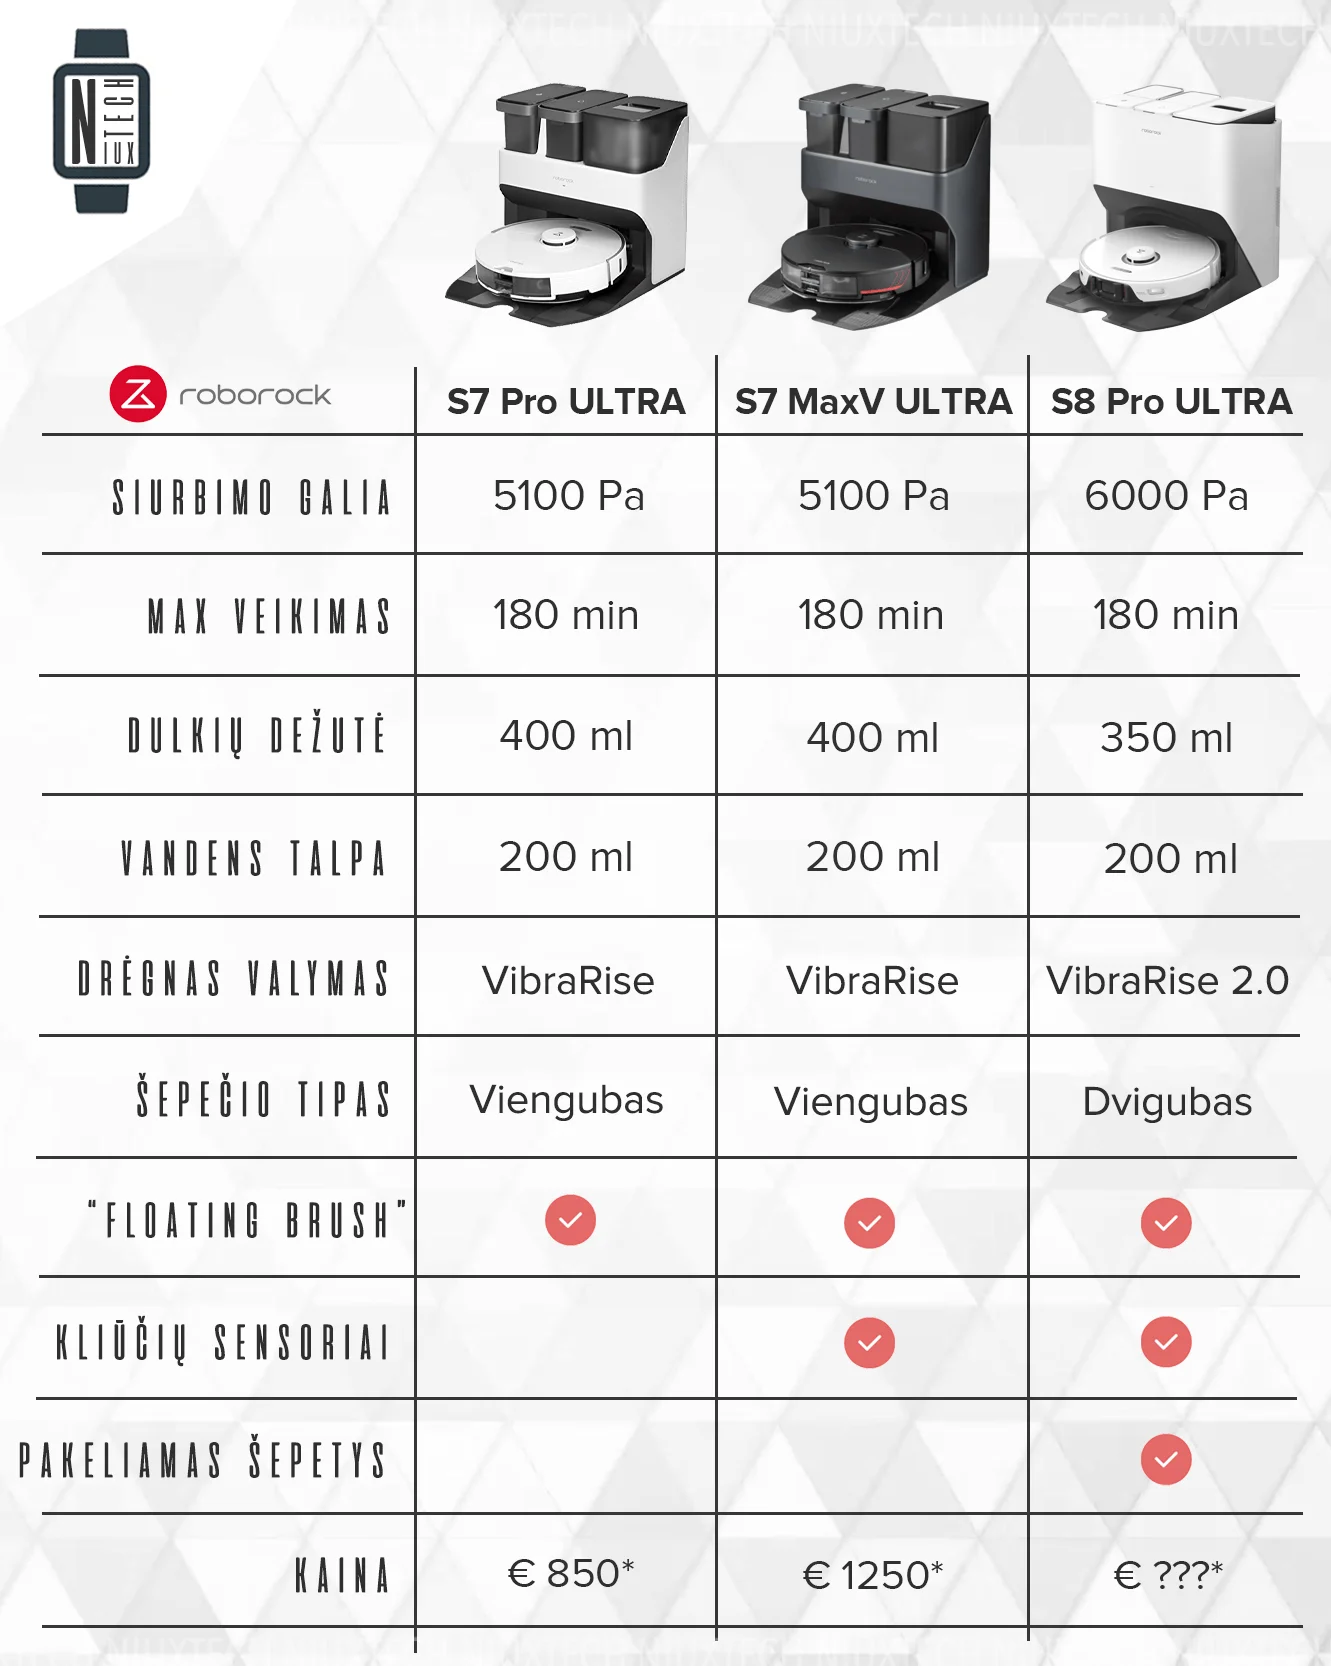 Roborock S7 vs Q7 - Differences Clearly Explained